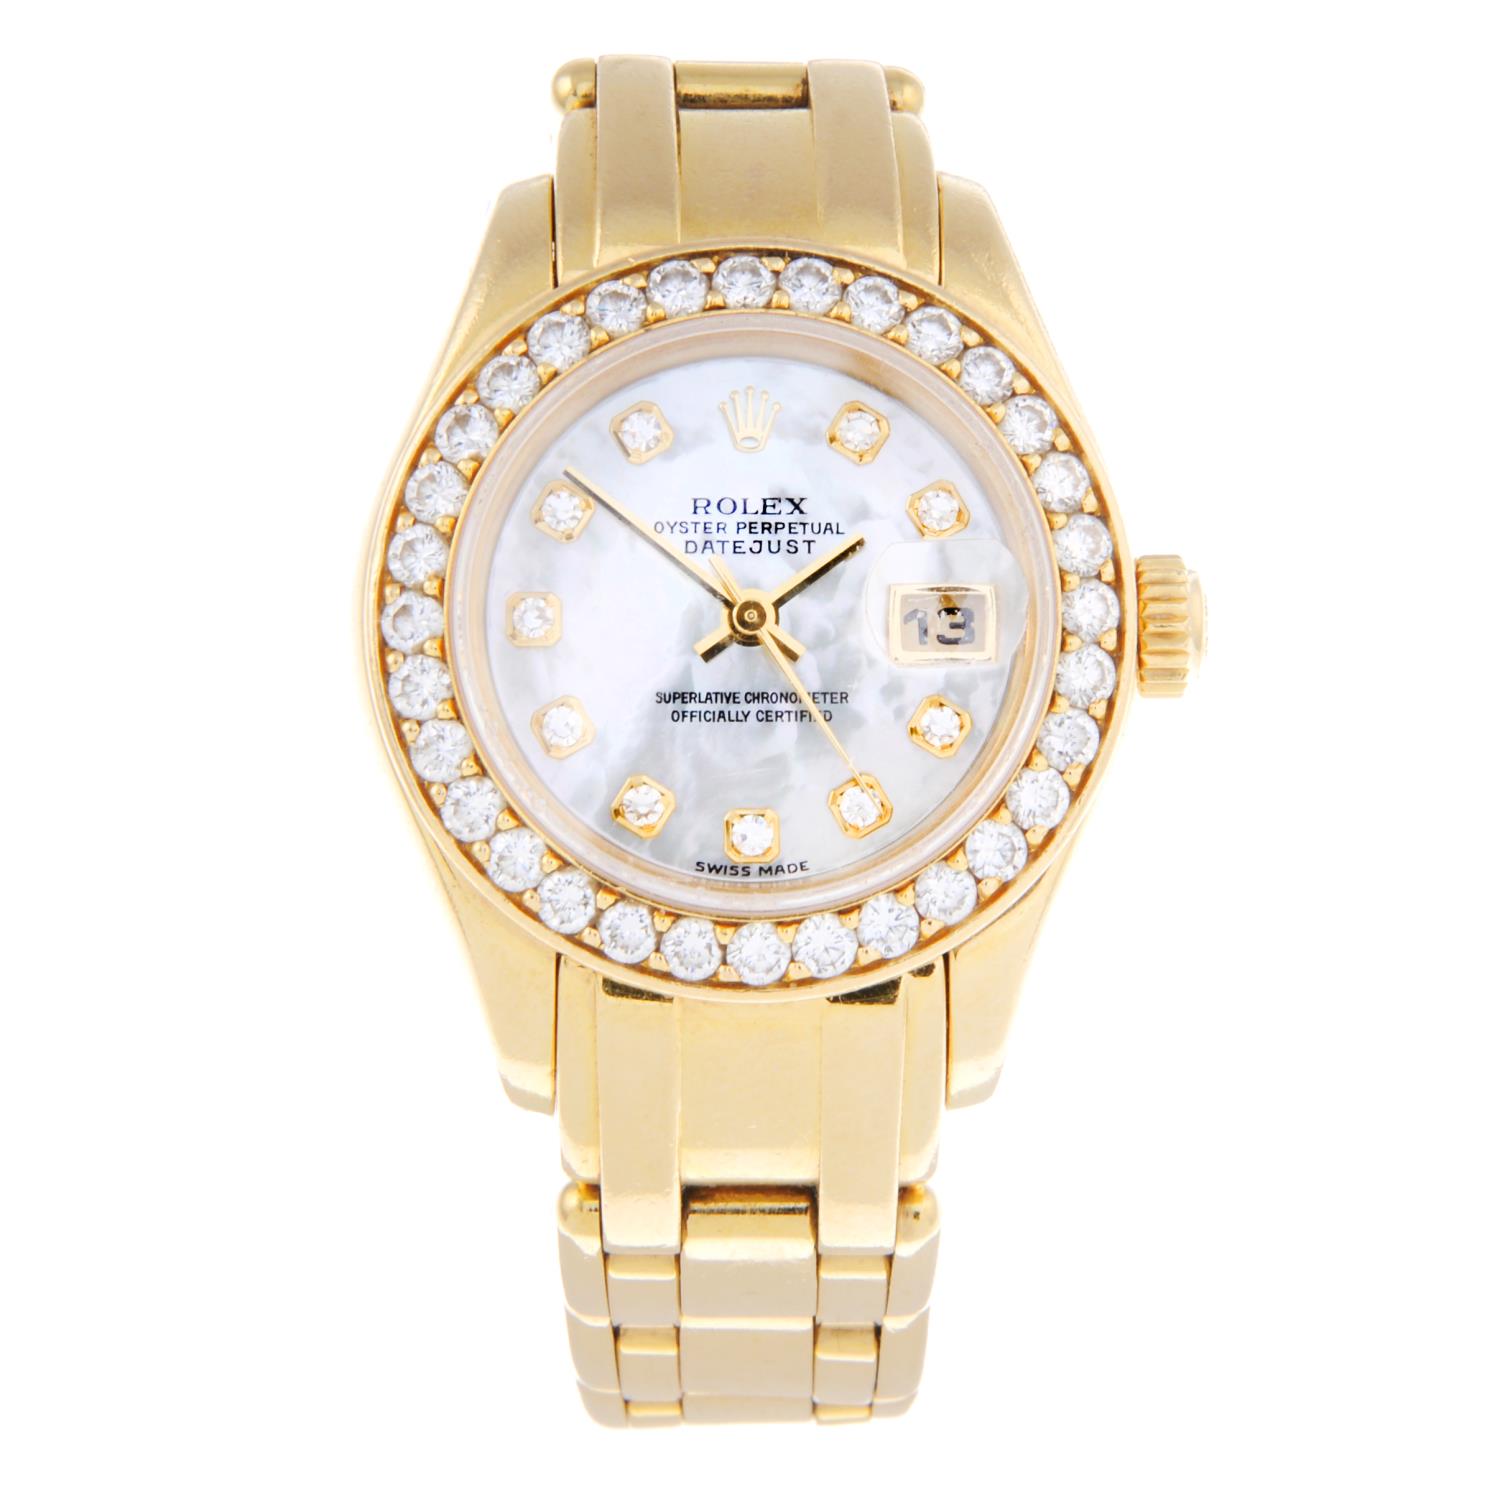 ROLEX - a lady's Oyster Perpetual Datejust Pearlmaster bracelet watch.